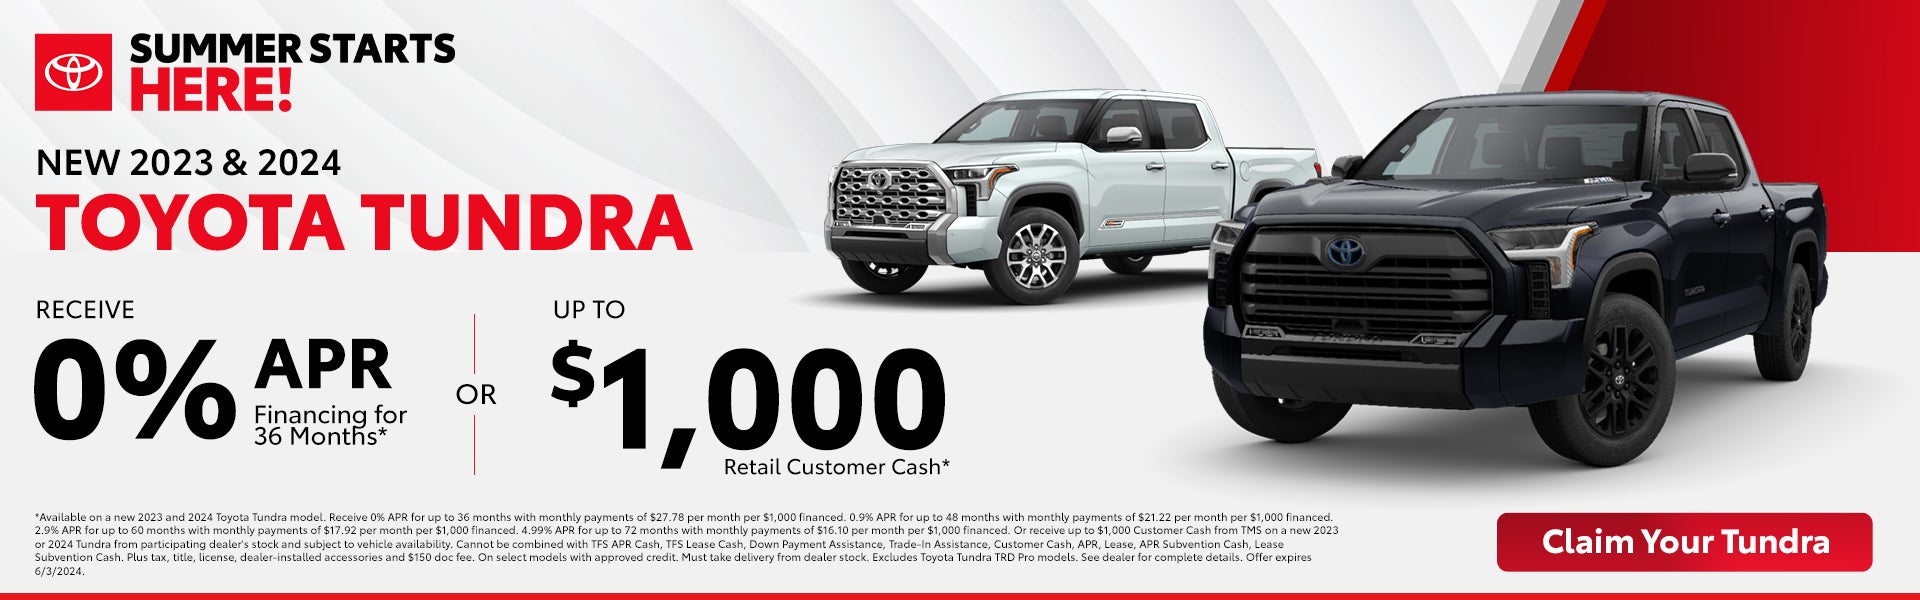 New 2023 and 2024 Toyota Tundra APR Offer Fort Worth TX